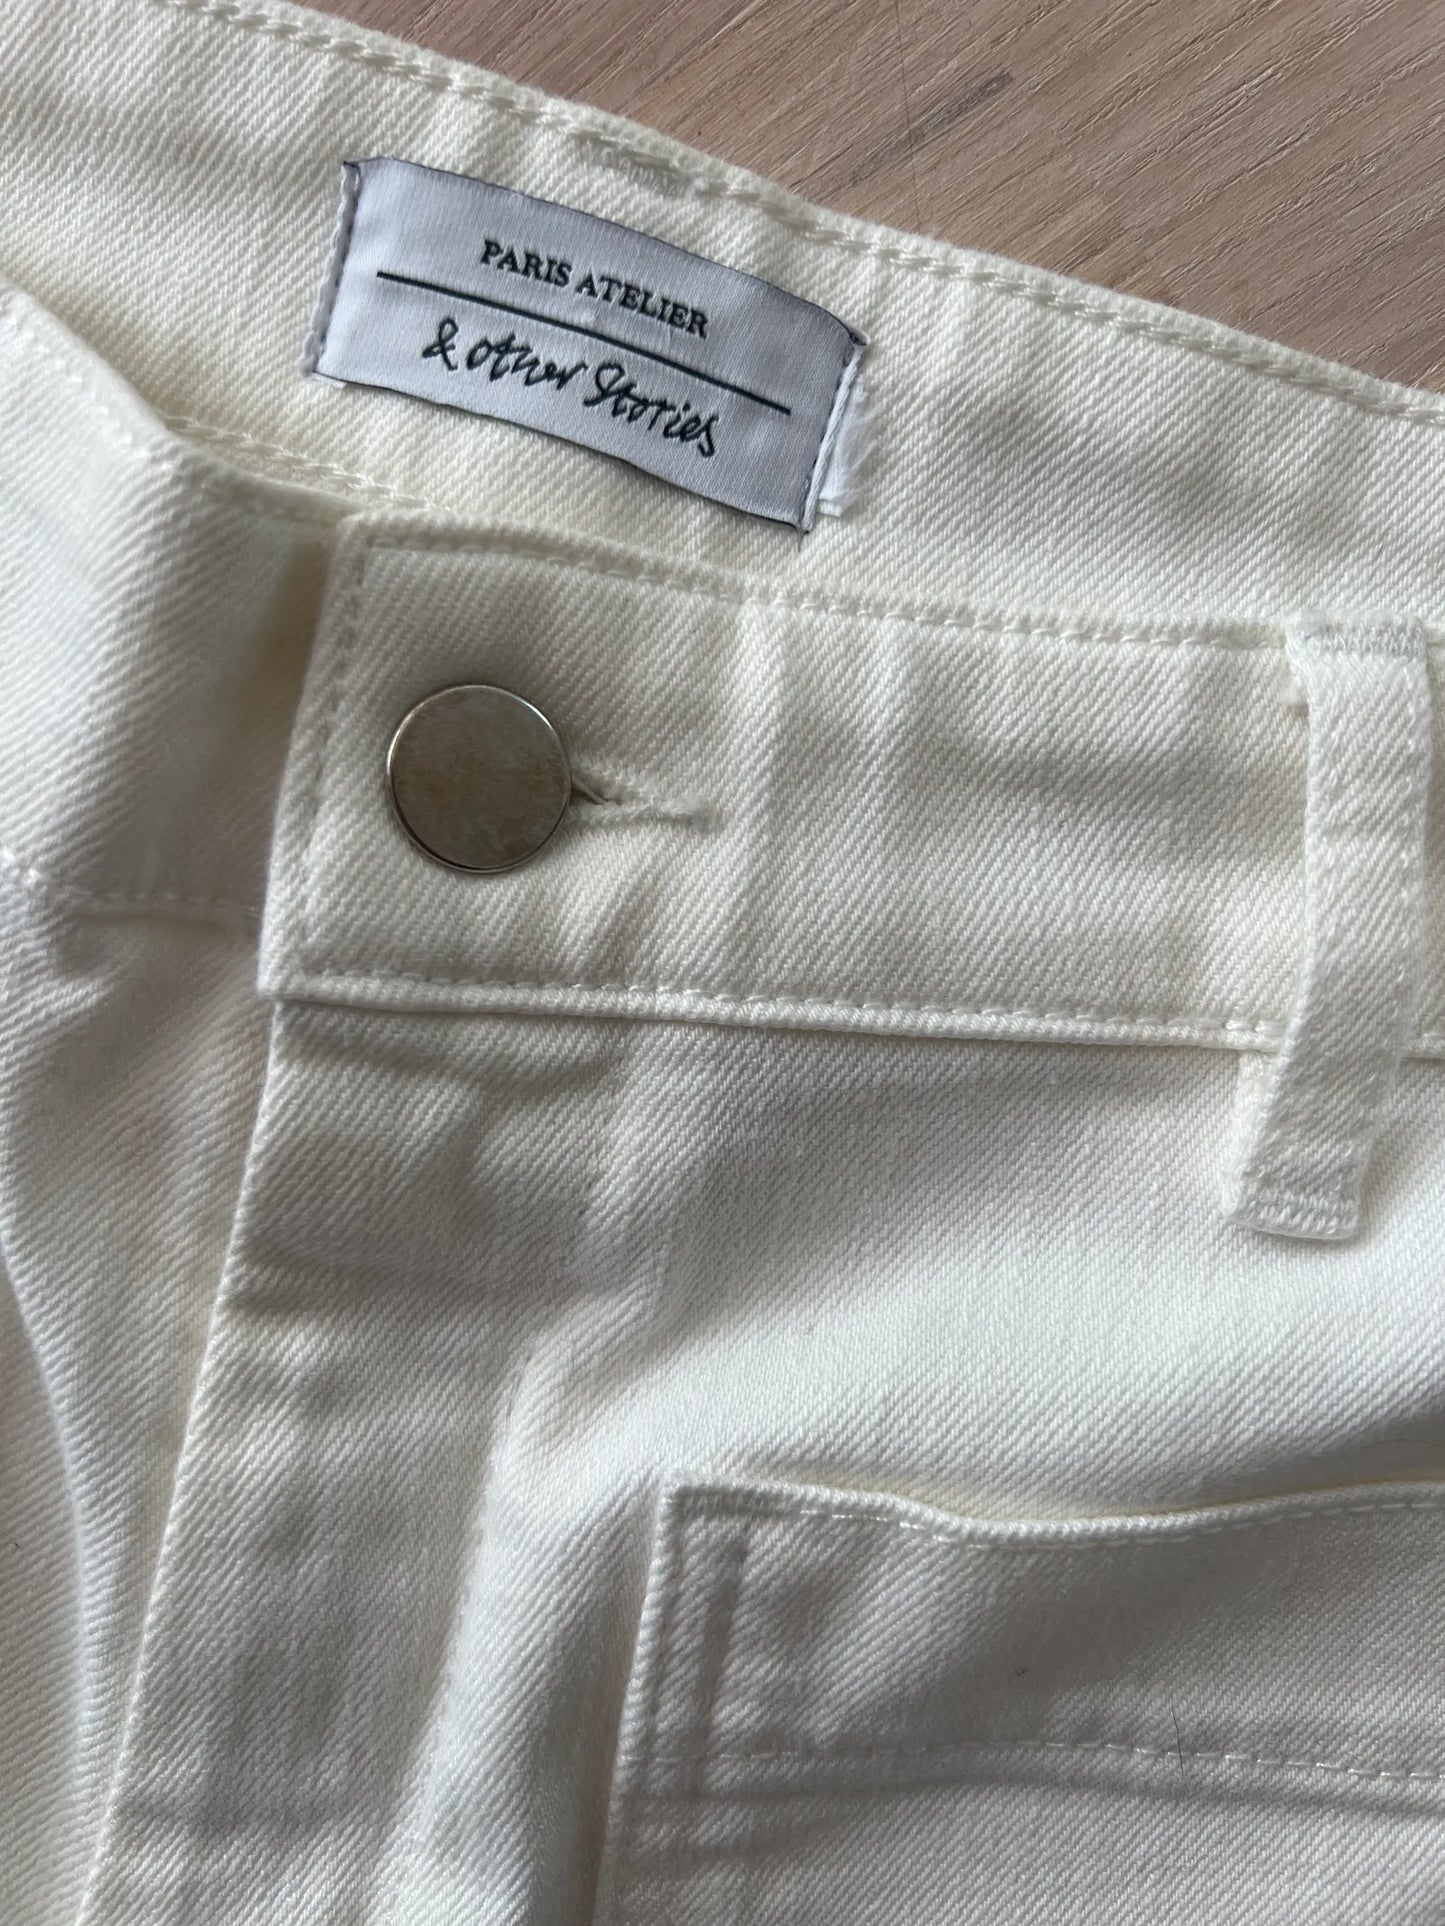 & Other Stories-jeans NWOT